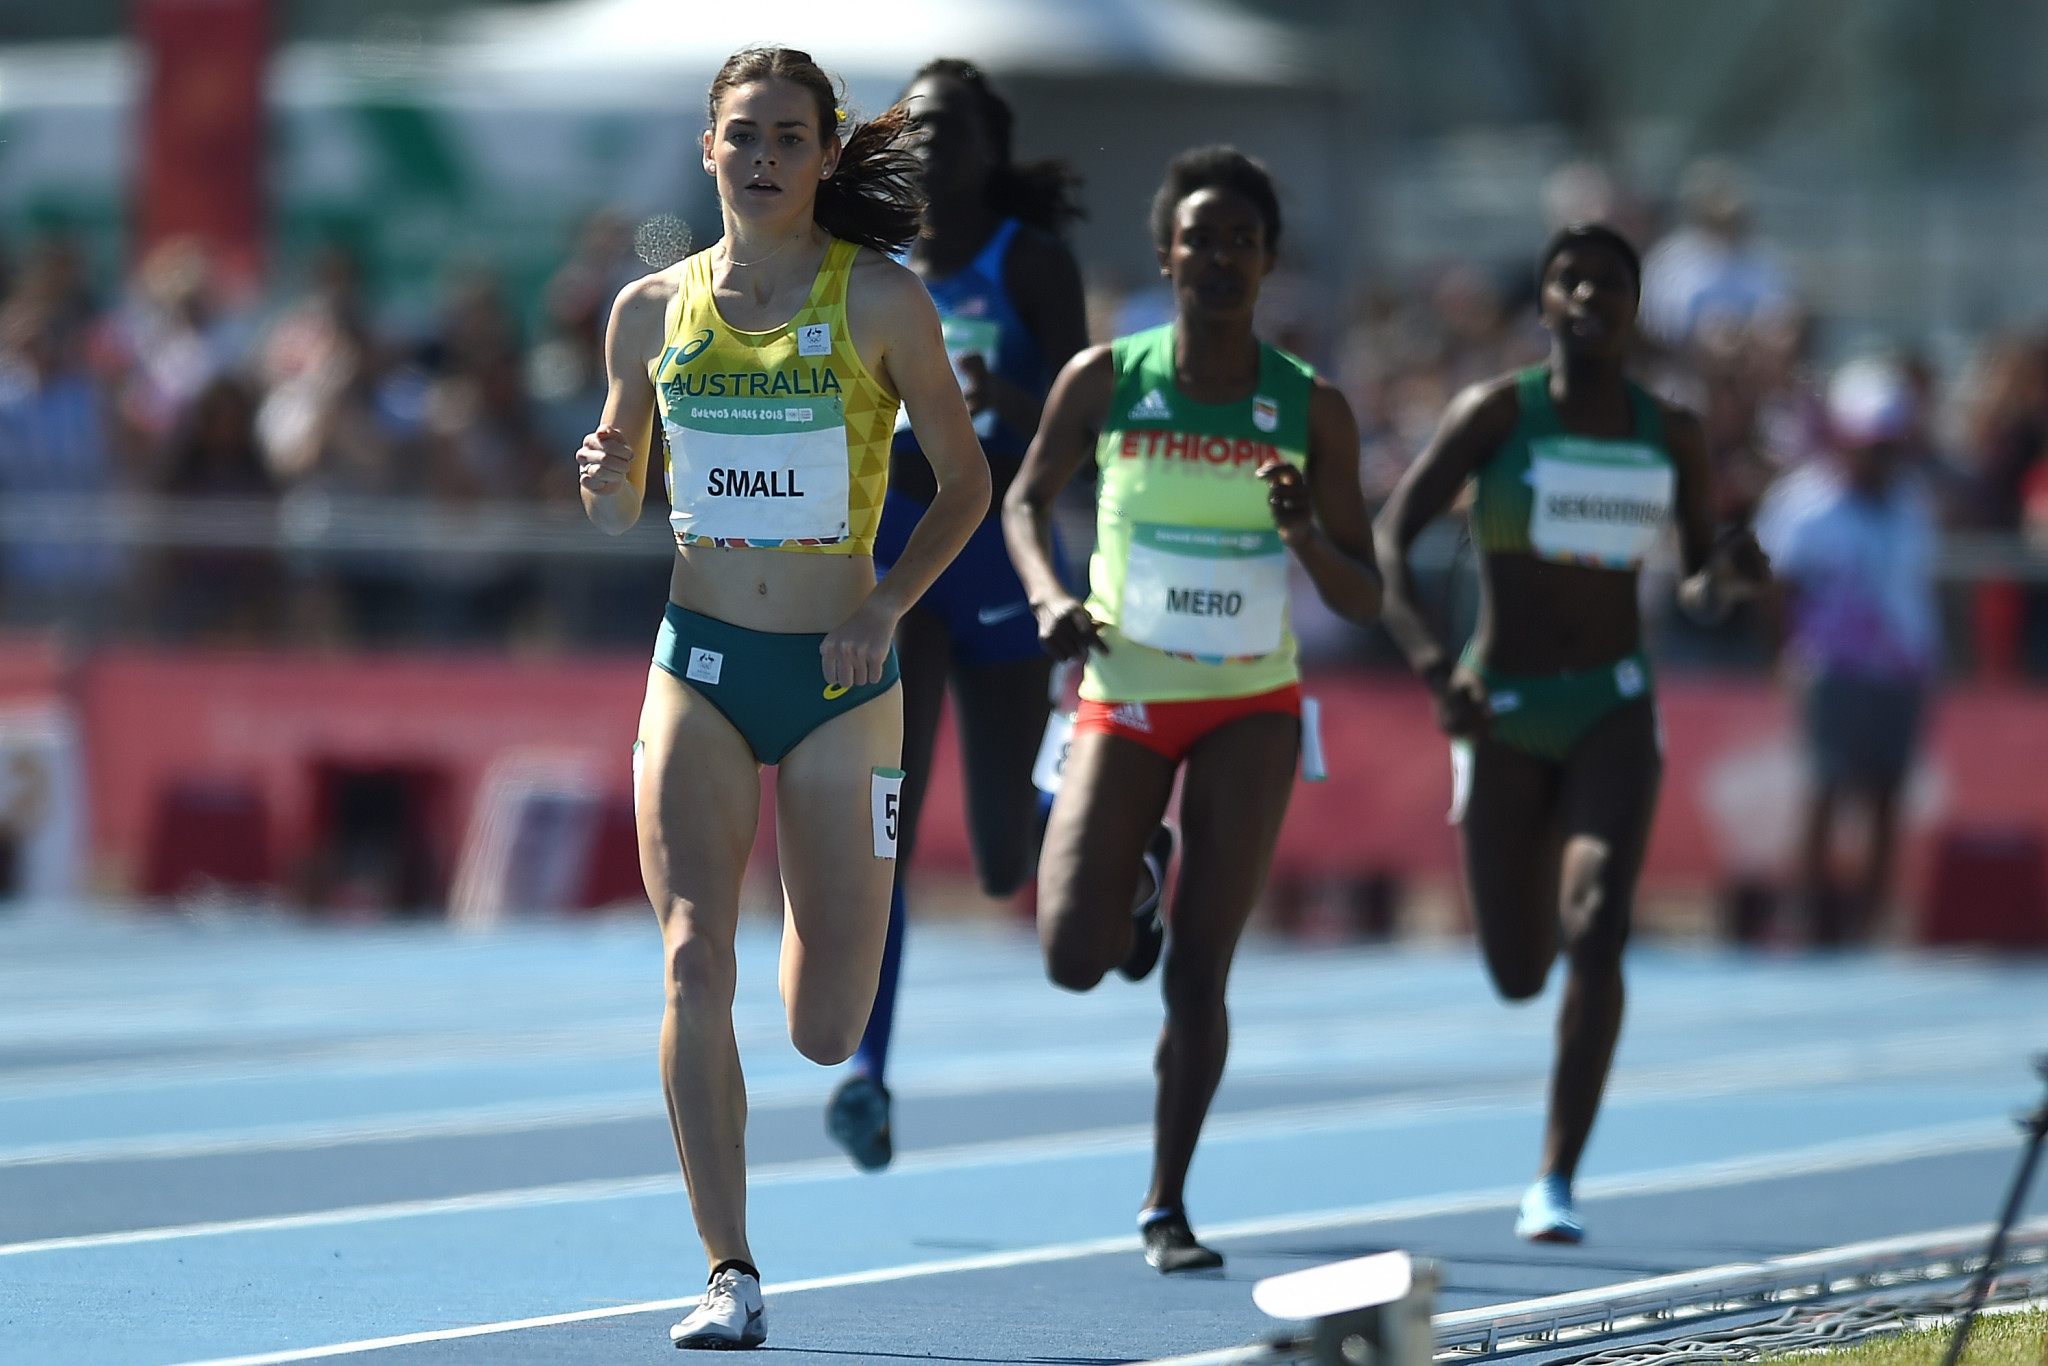 Australia's Keely Small triumphed in the women's 800m ©Getty Images